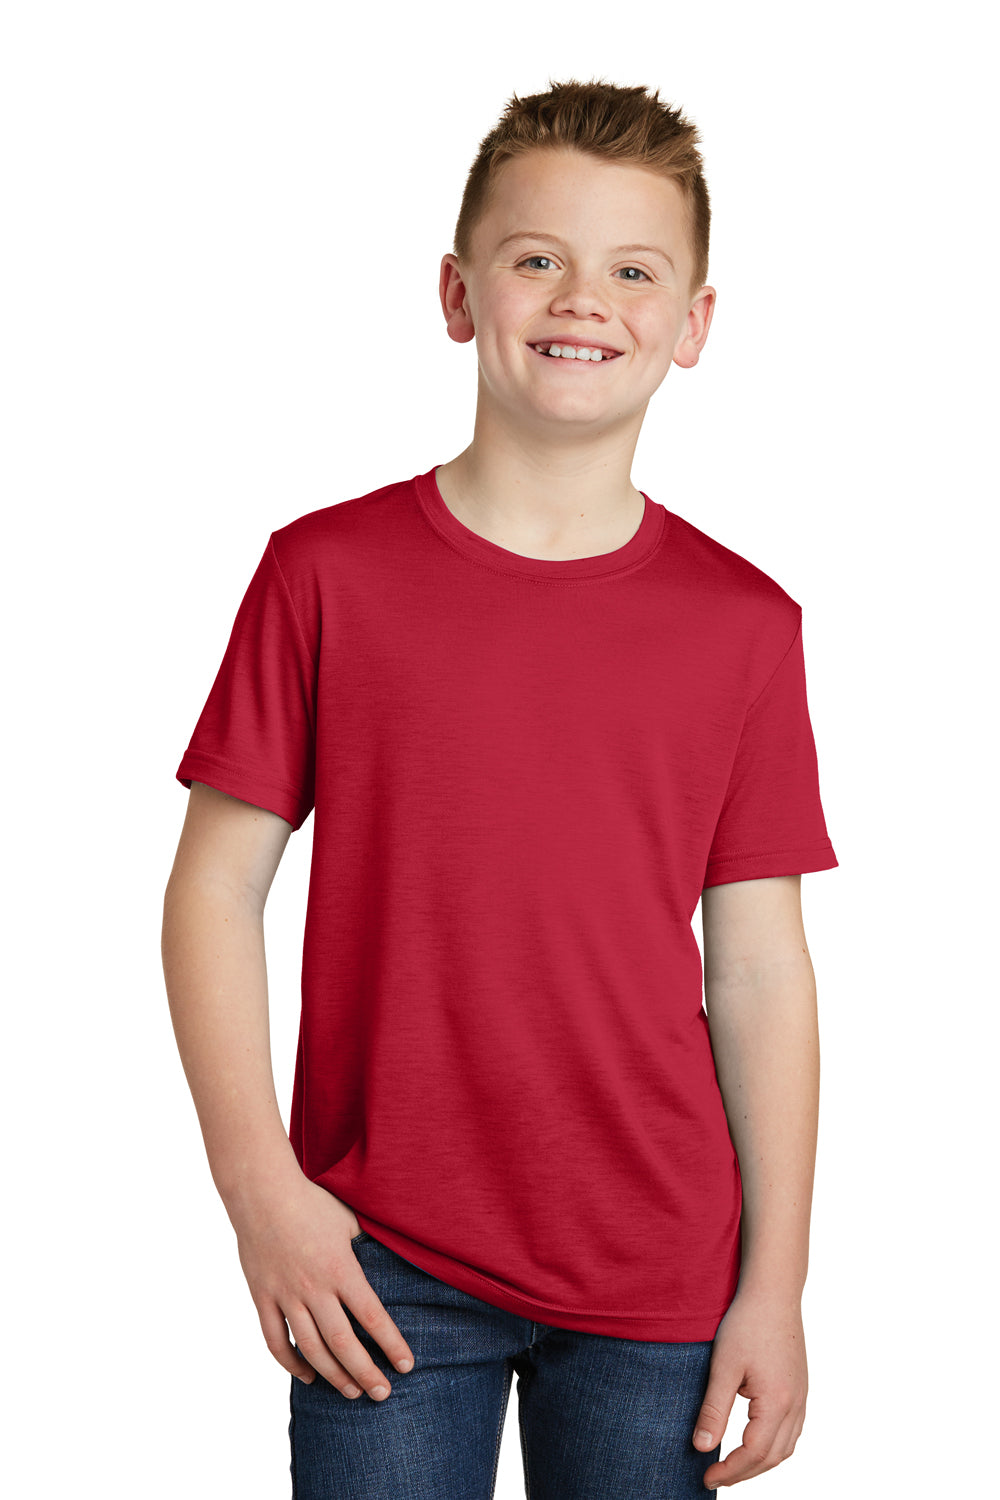 Sport-Tek YST450 Youth Competitor Moisture Wicking Short Sleeve Crewneck T-Shirt Red Front